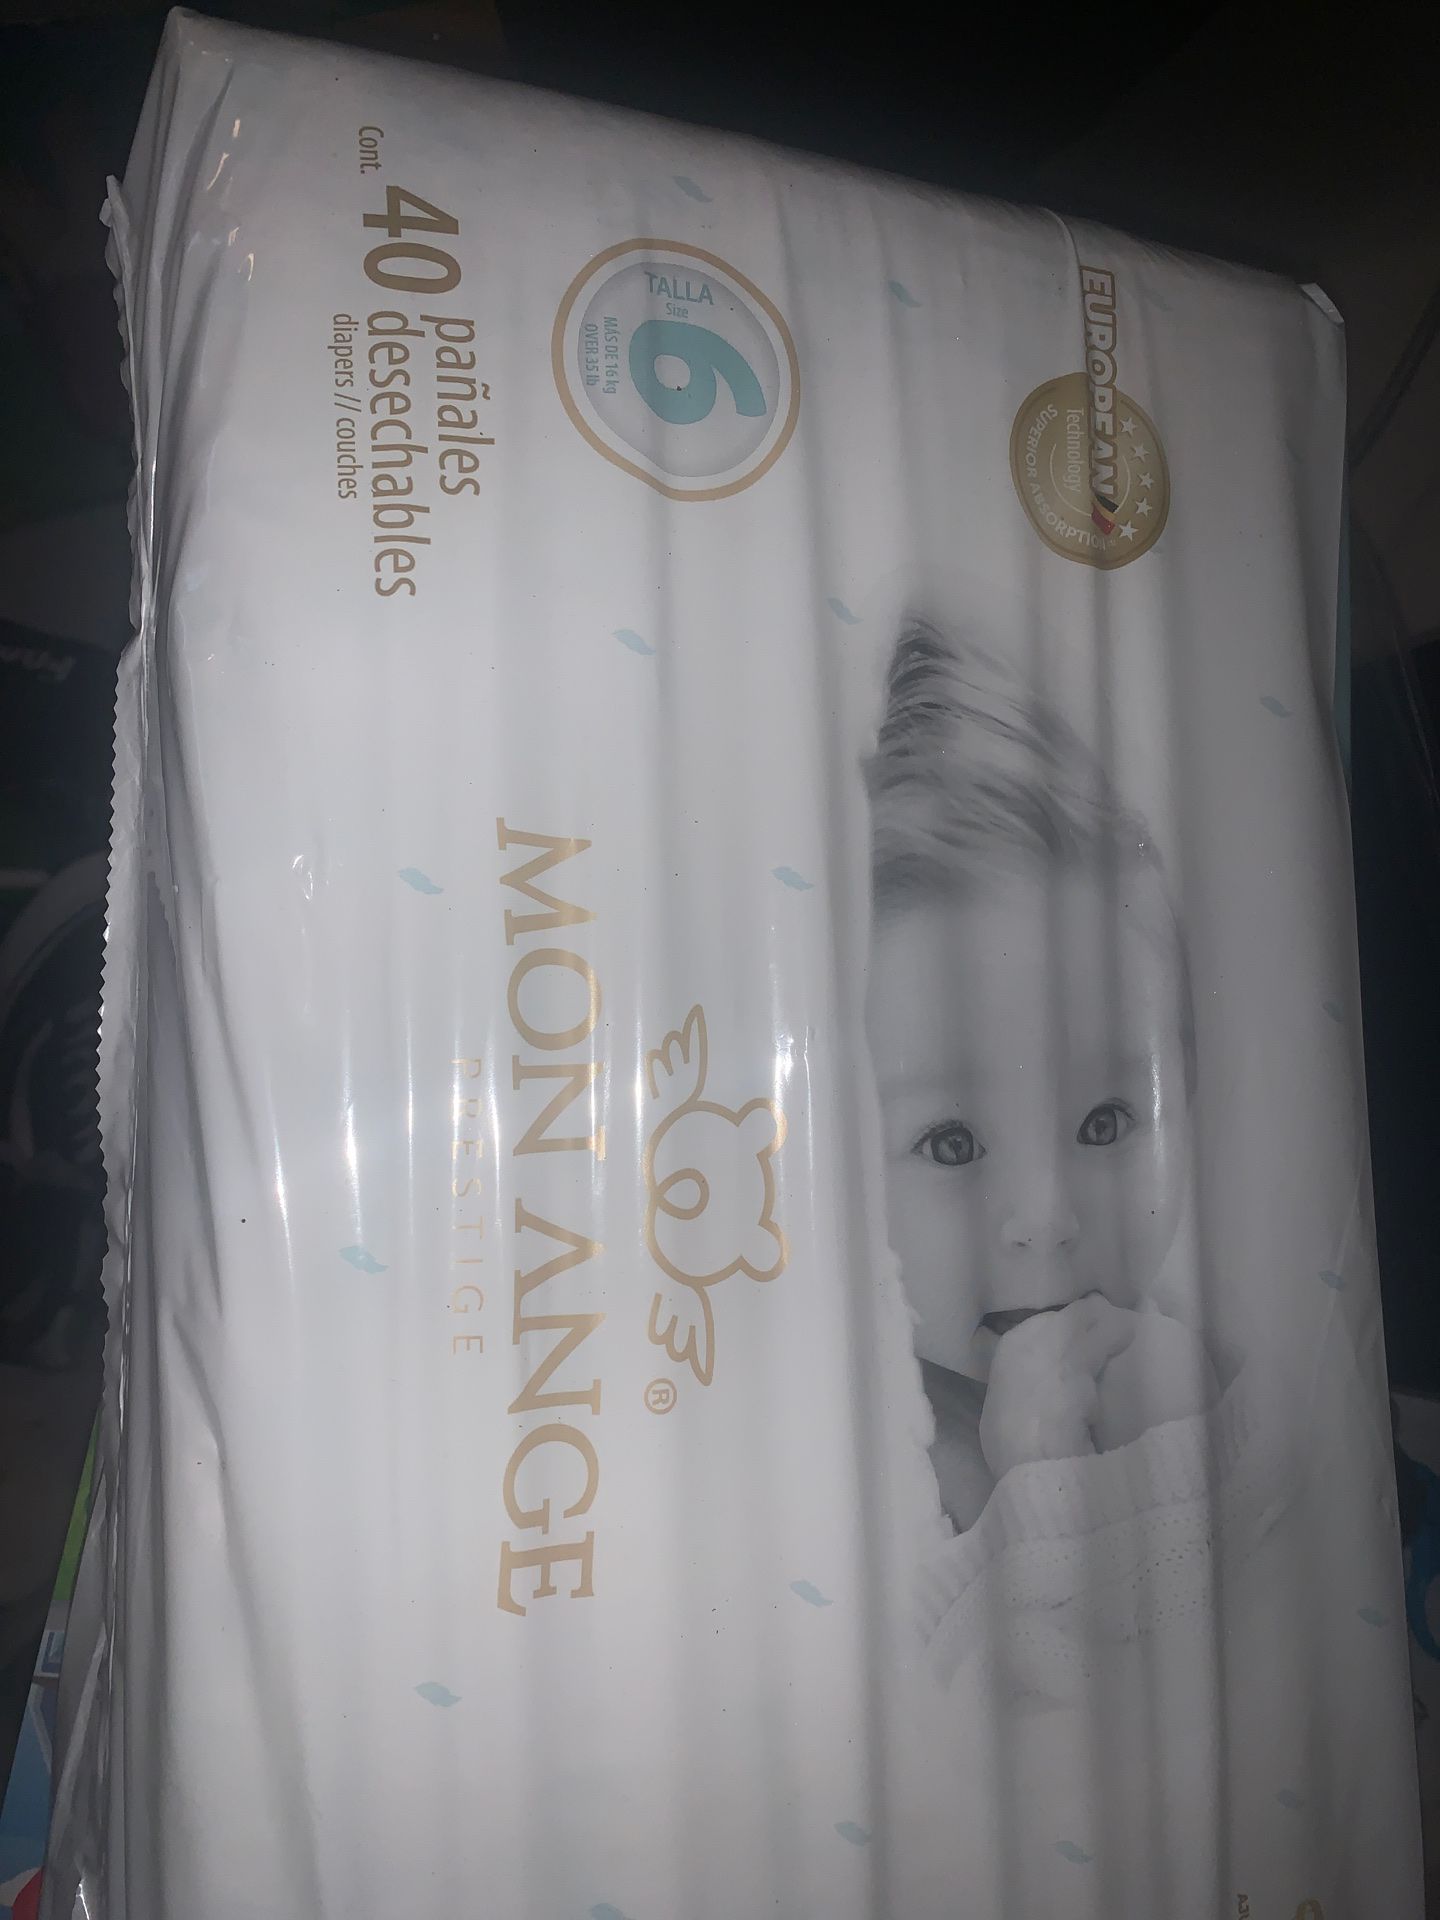 Size 6 diapers 40 count